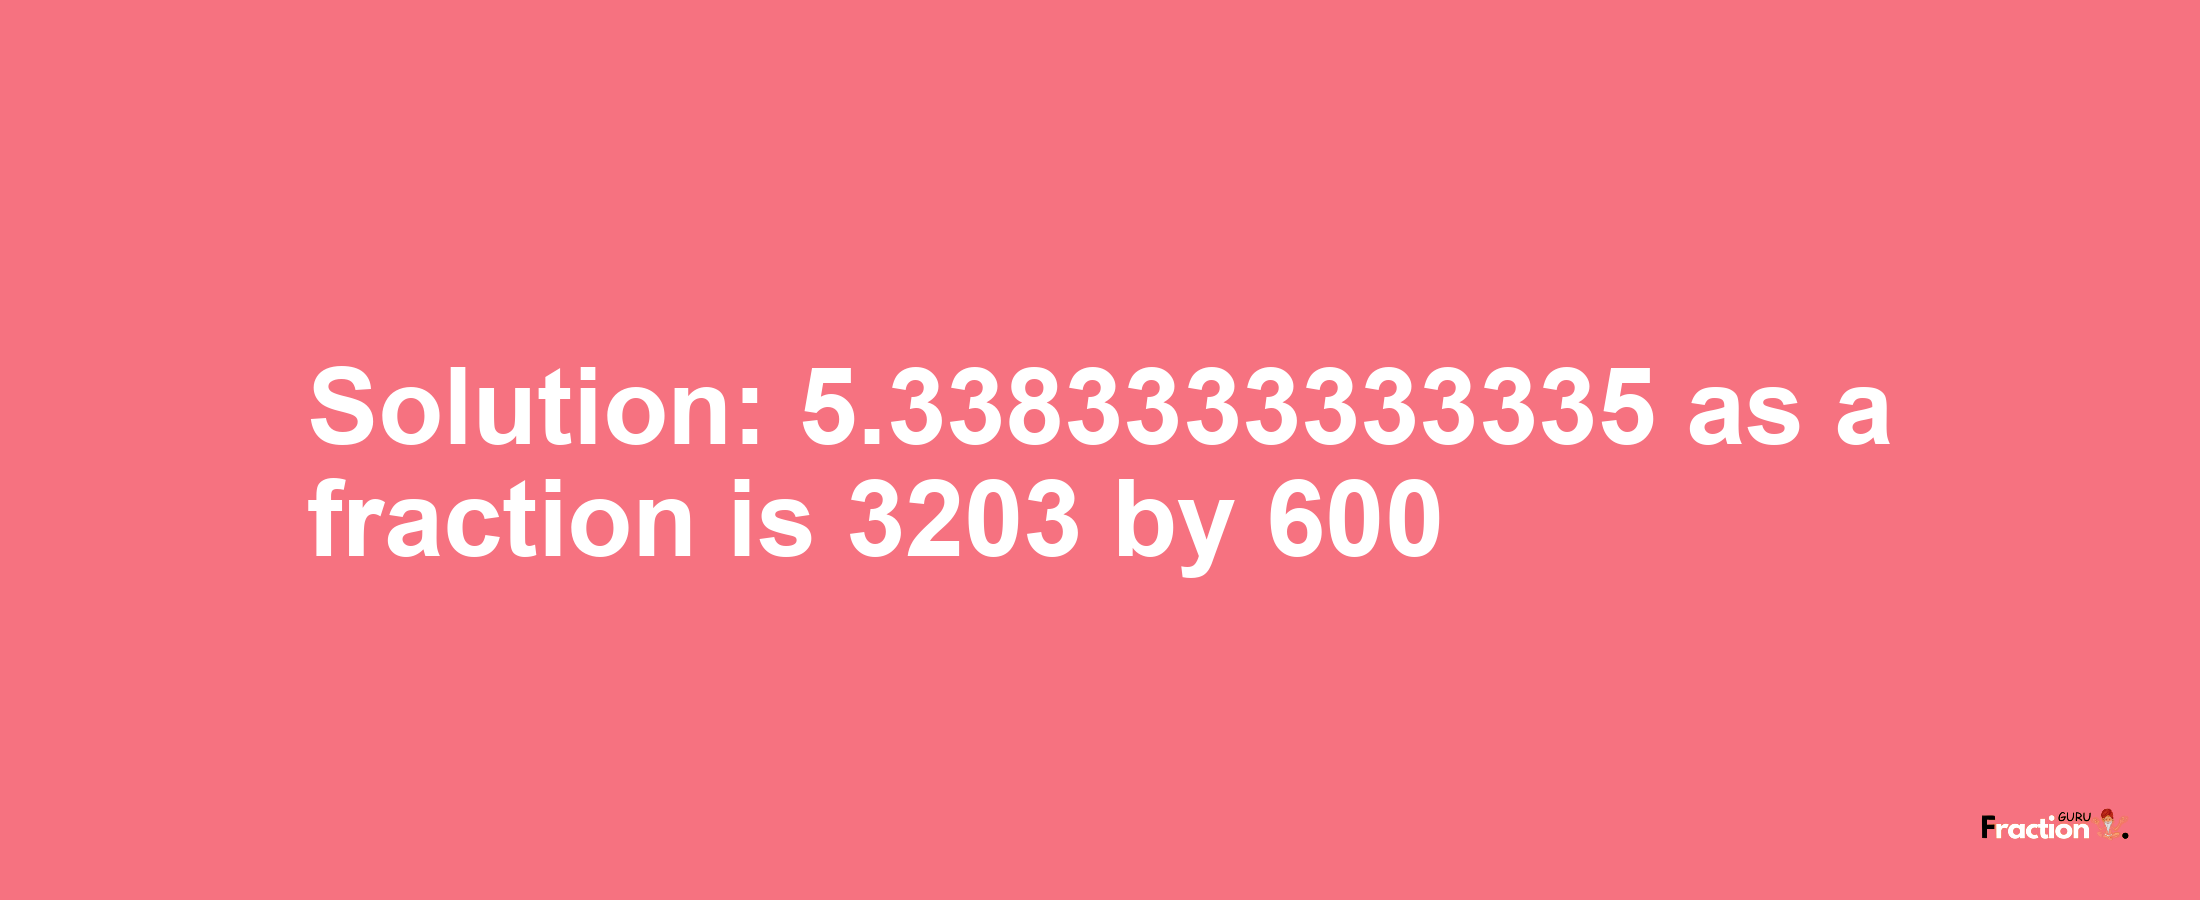 Solution:5.3383333333335 as a fraction is 3203/600